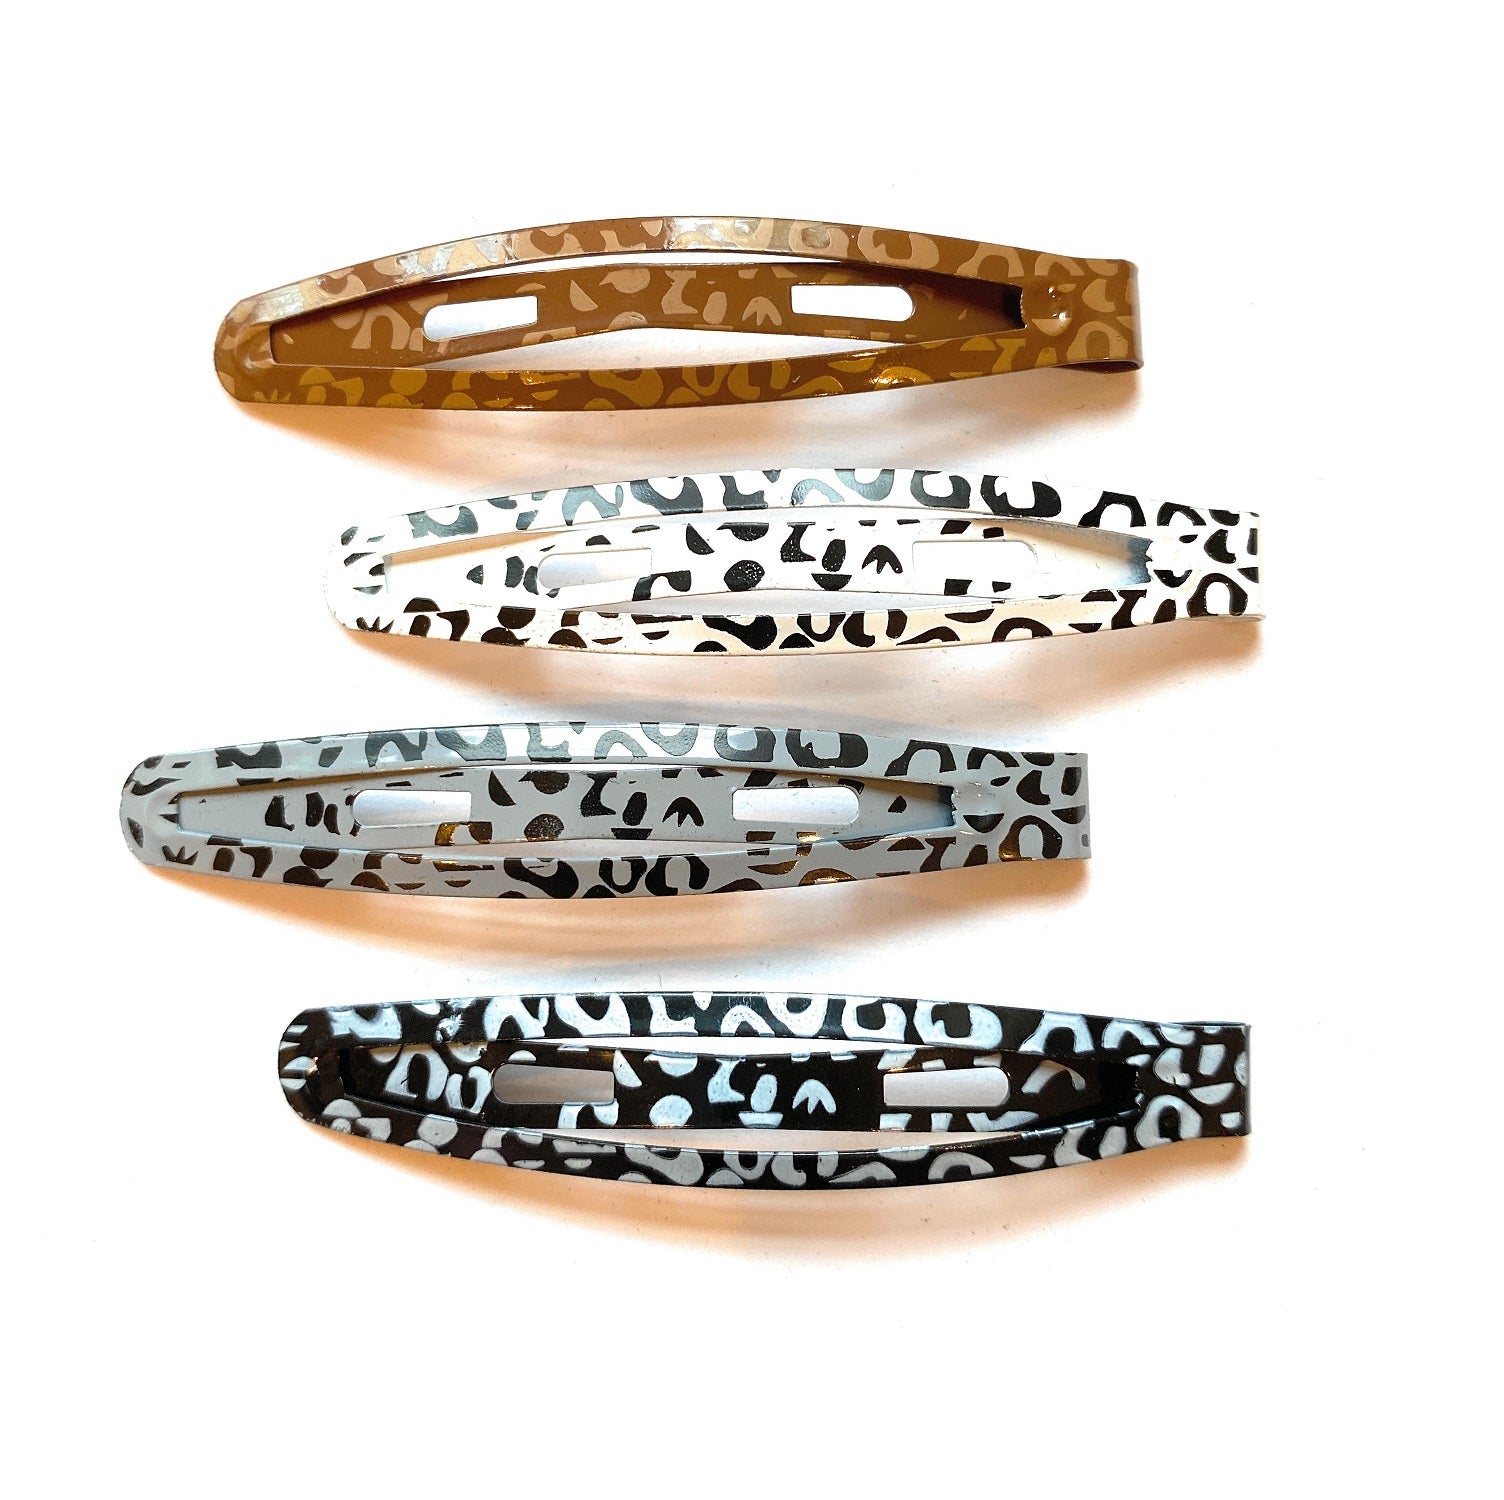 Mia® Snip Snaps® hair barrettes in leopard print in brown, white, gray and black colors